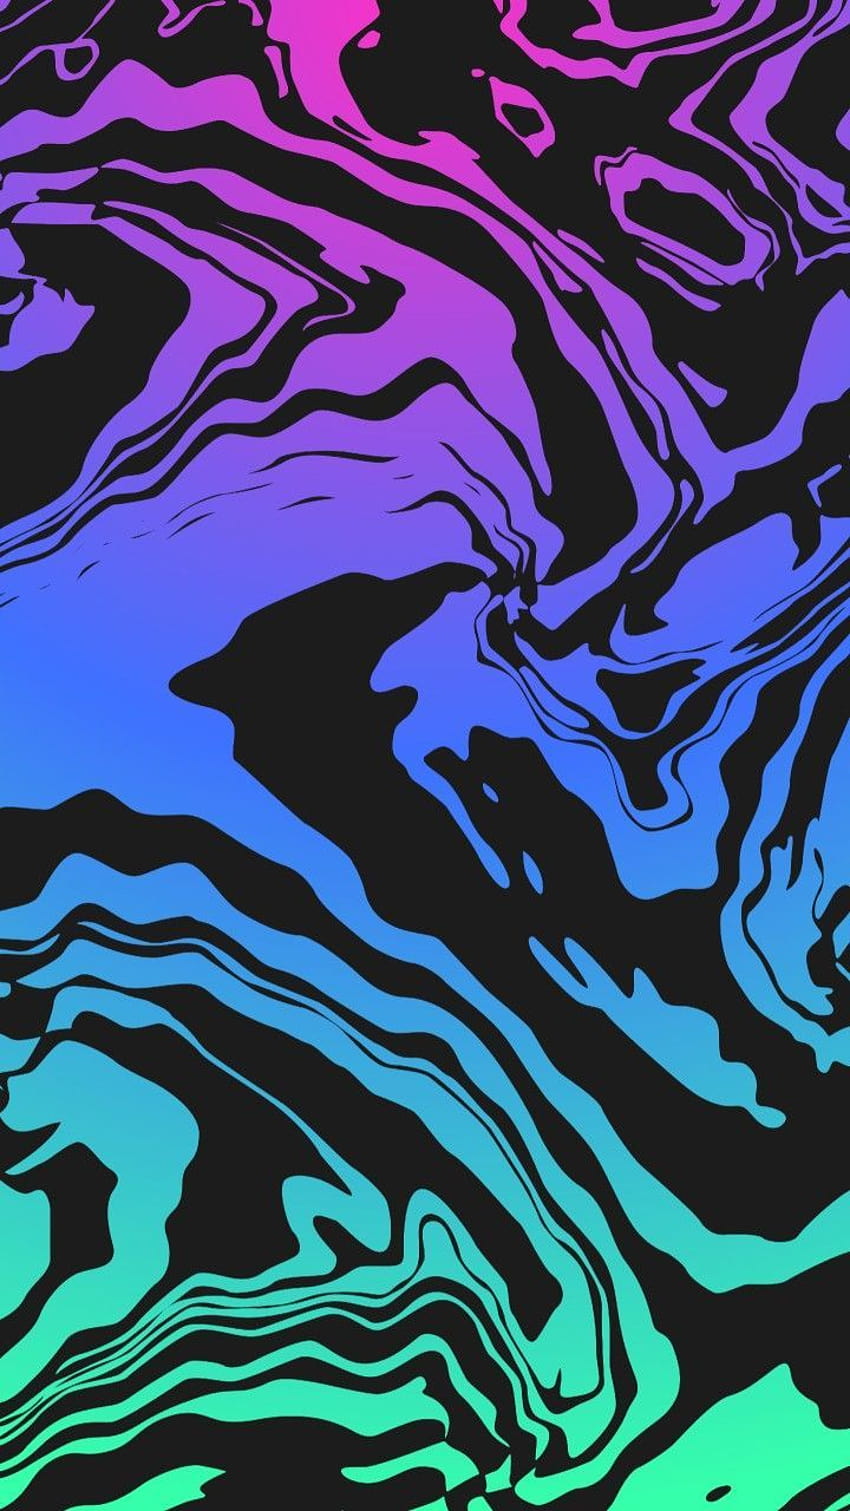 You can visit for more., trippy amoled HD phone wallpaper